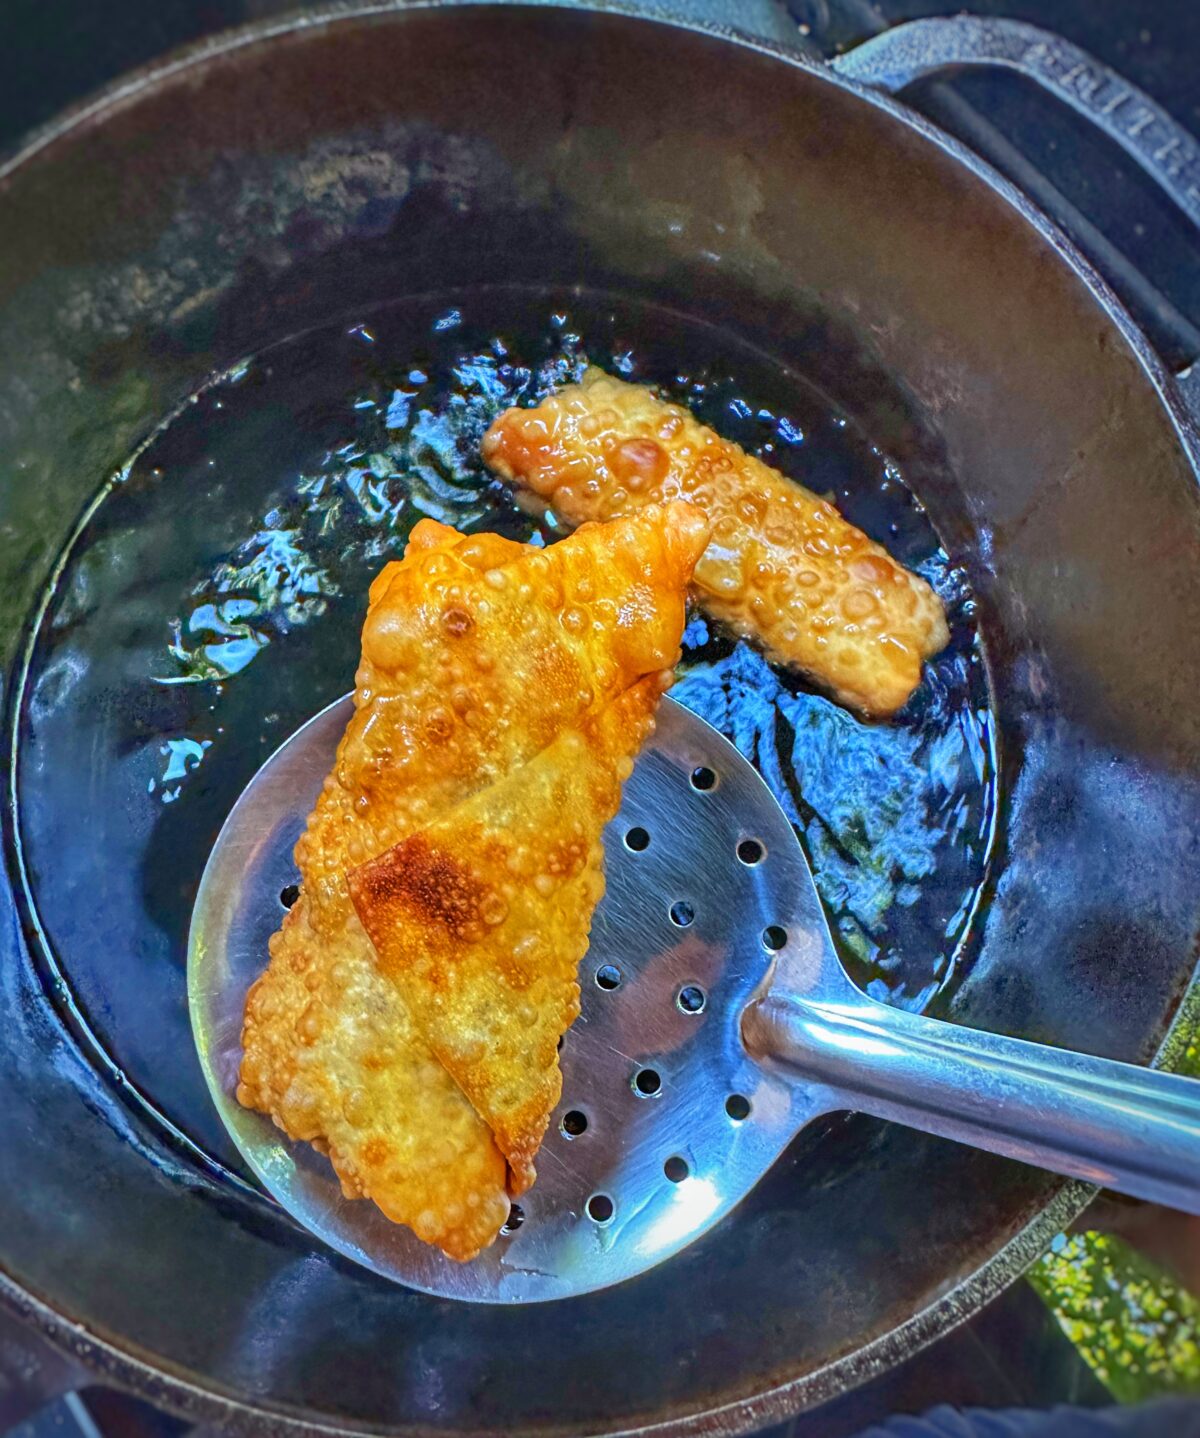 Two golden southwest egg rolls frying in a cast iron pan.